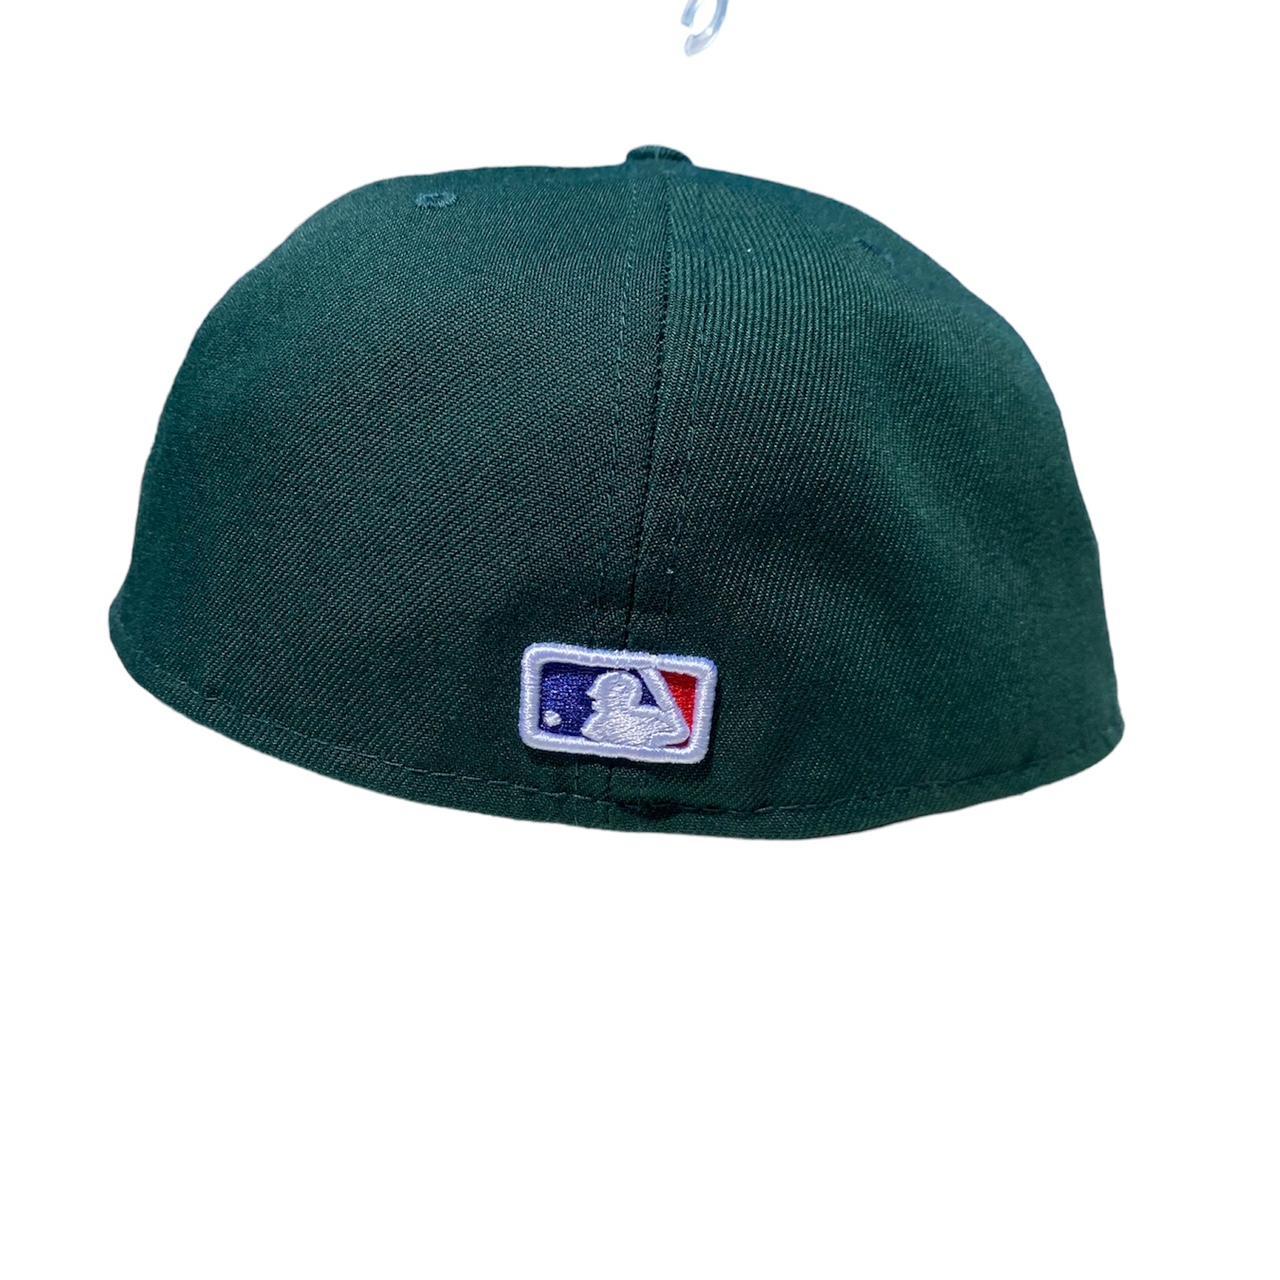 Nwt Polo Ralph Lauren Green LA Dodgers Fitted Hat